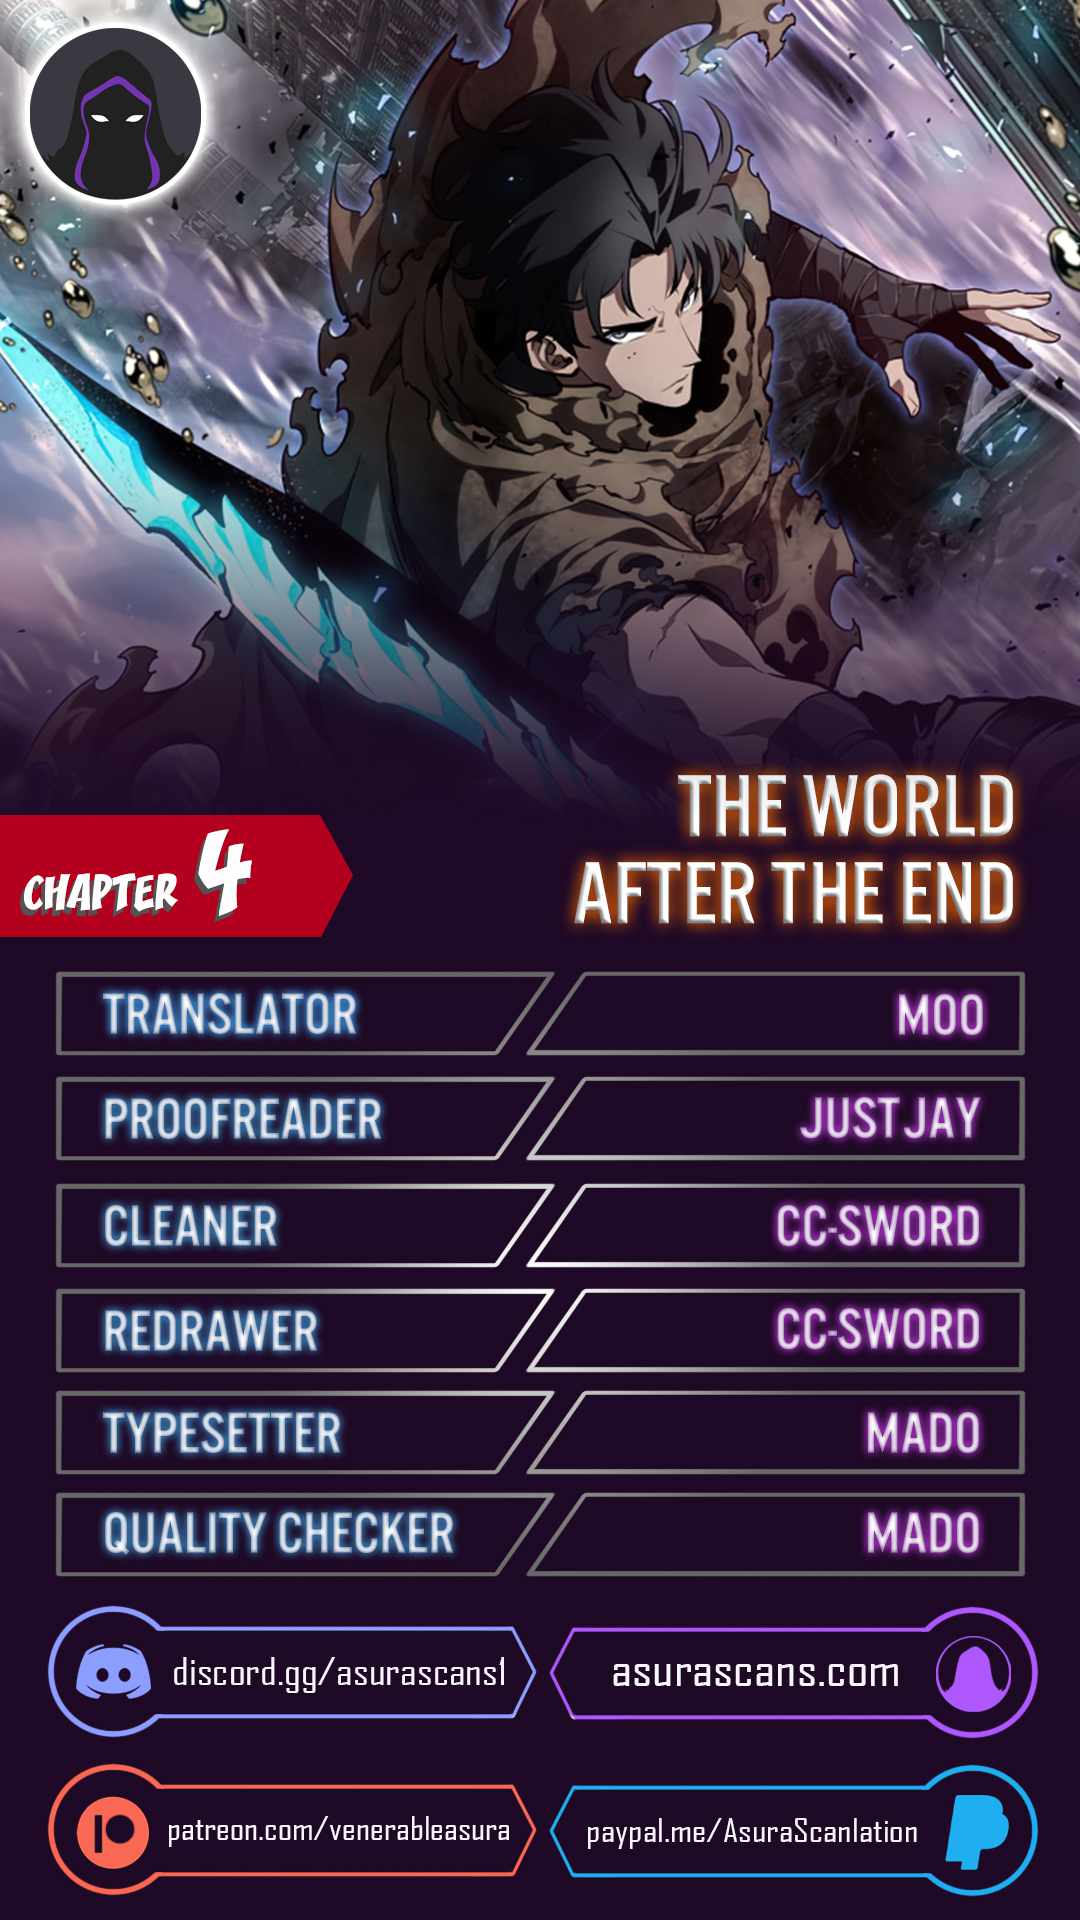 The World After The Fall chapter 4